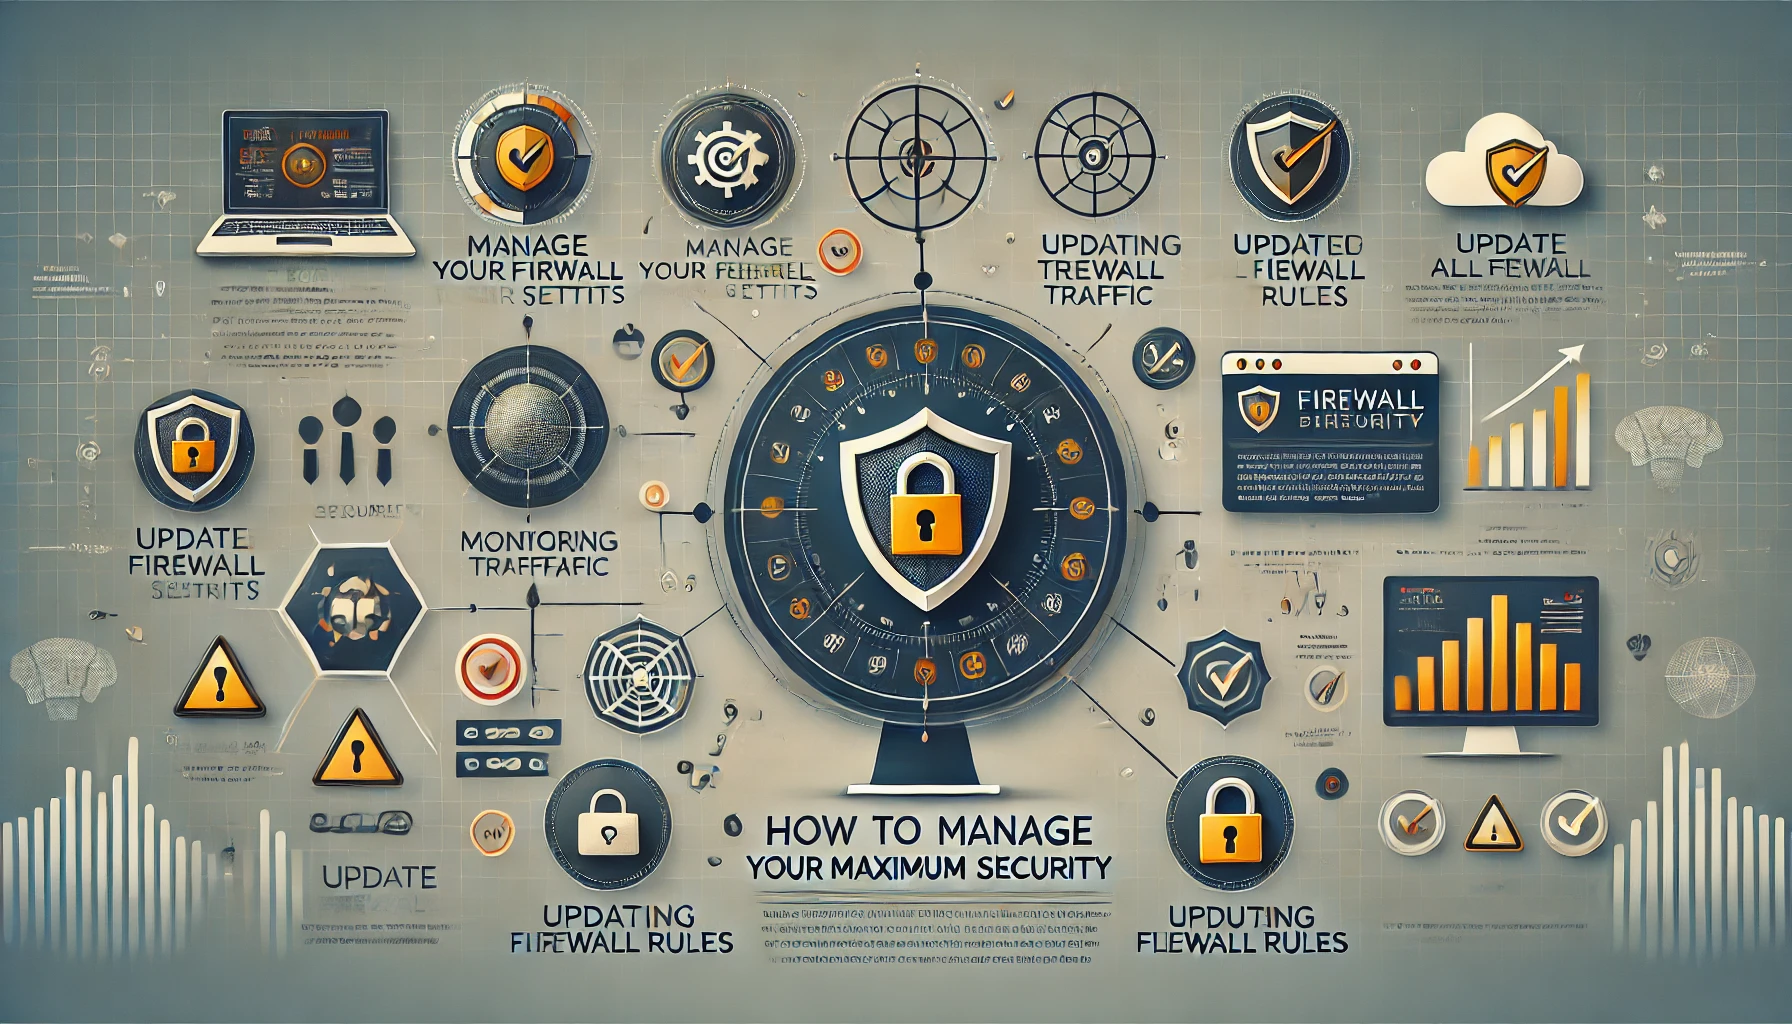 "Infographic on How to Manage Your Firewall for Maximum Security with icons of a computer screen, shield, lock, checkmark, and alert symbol, showing steps for managing firewall settings, monitoring traffic, and updating rules."